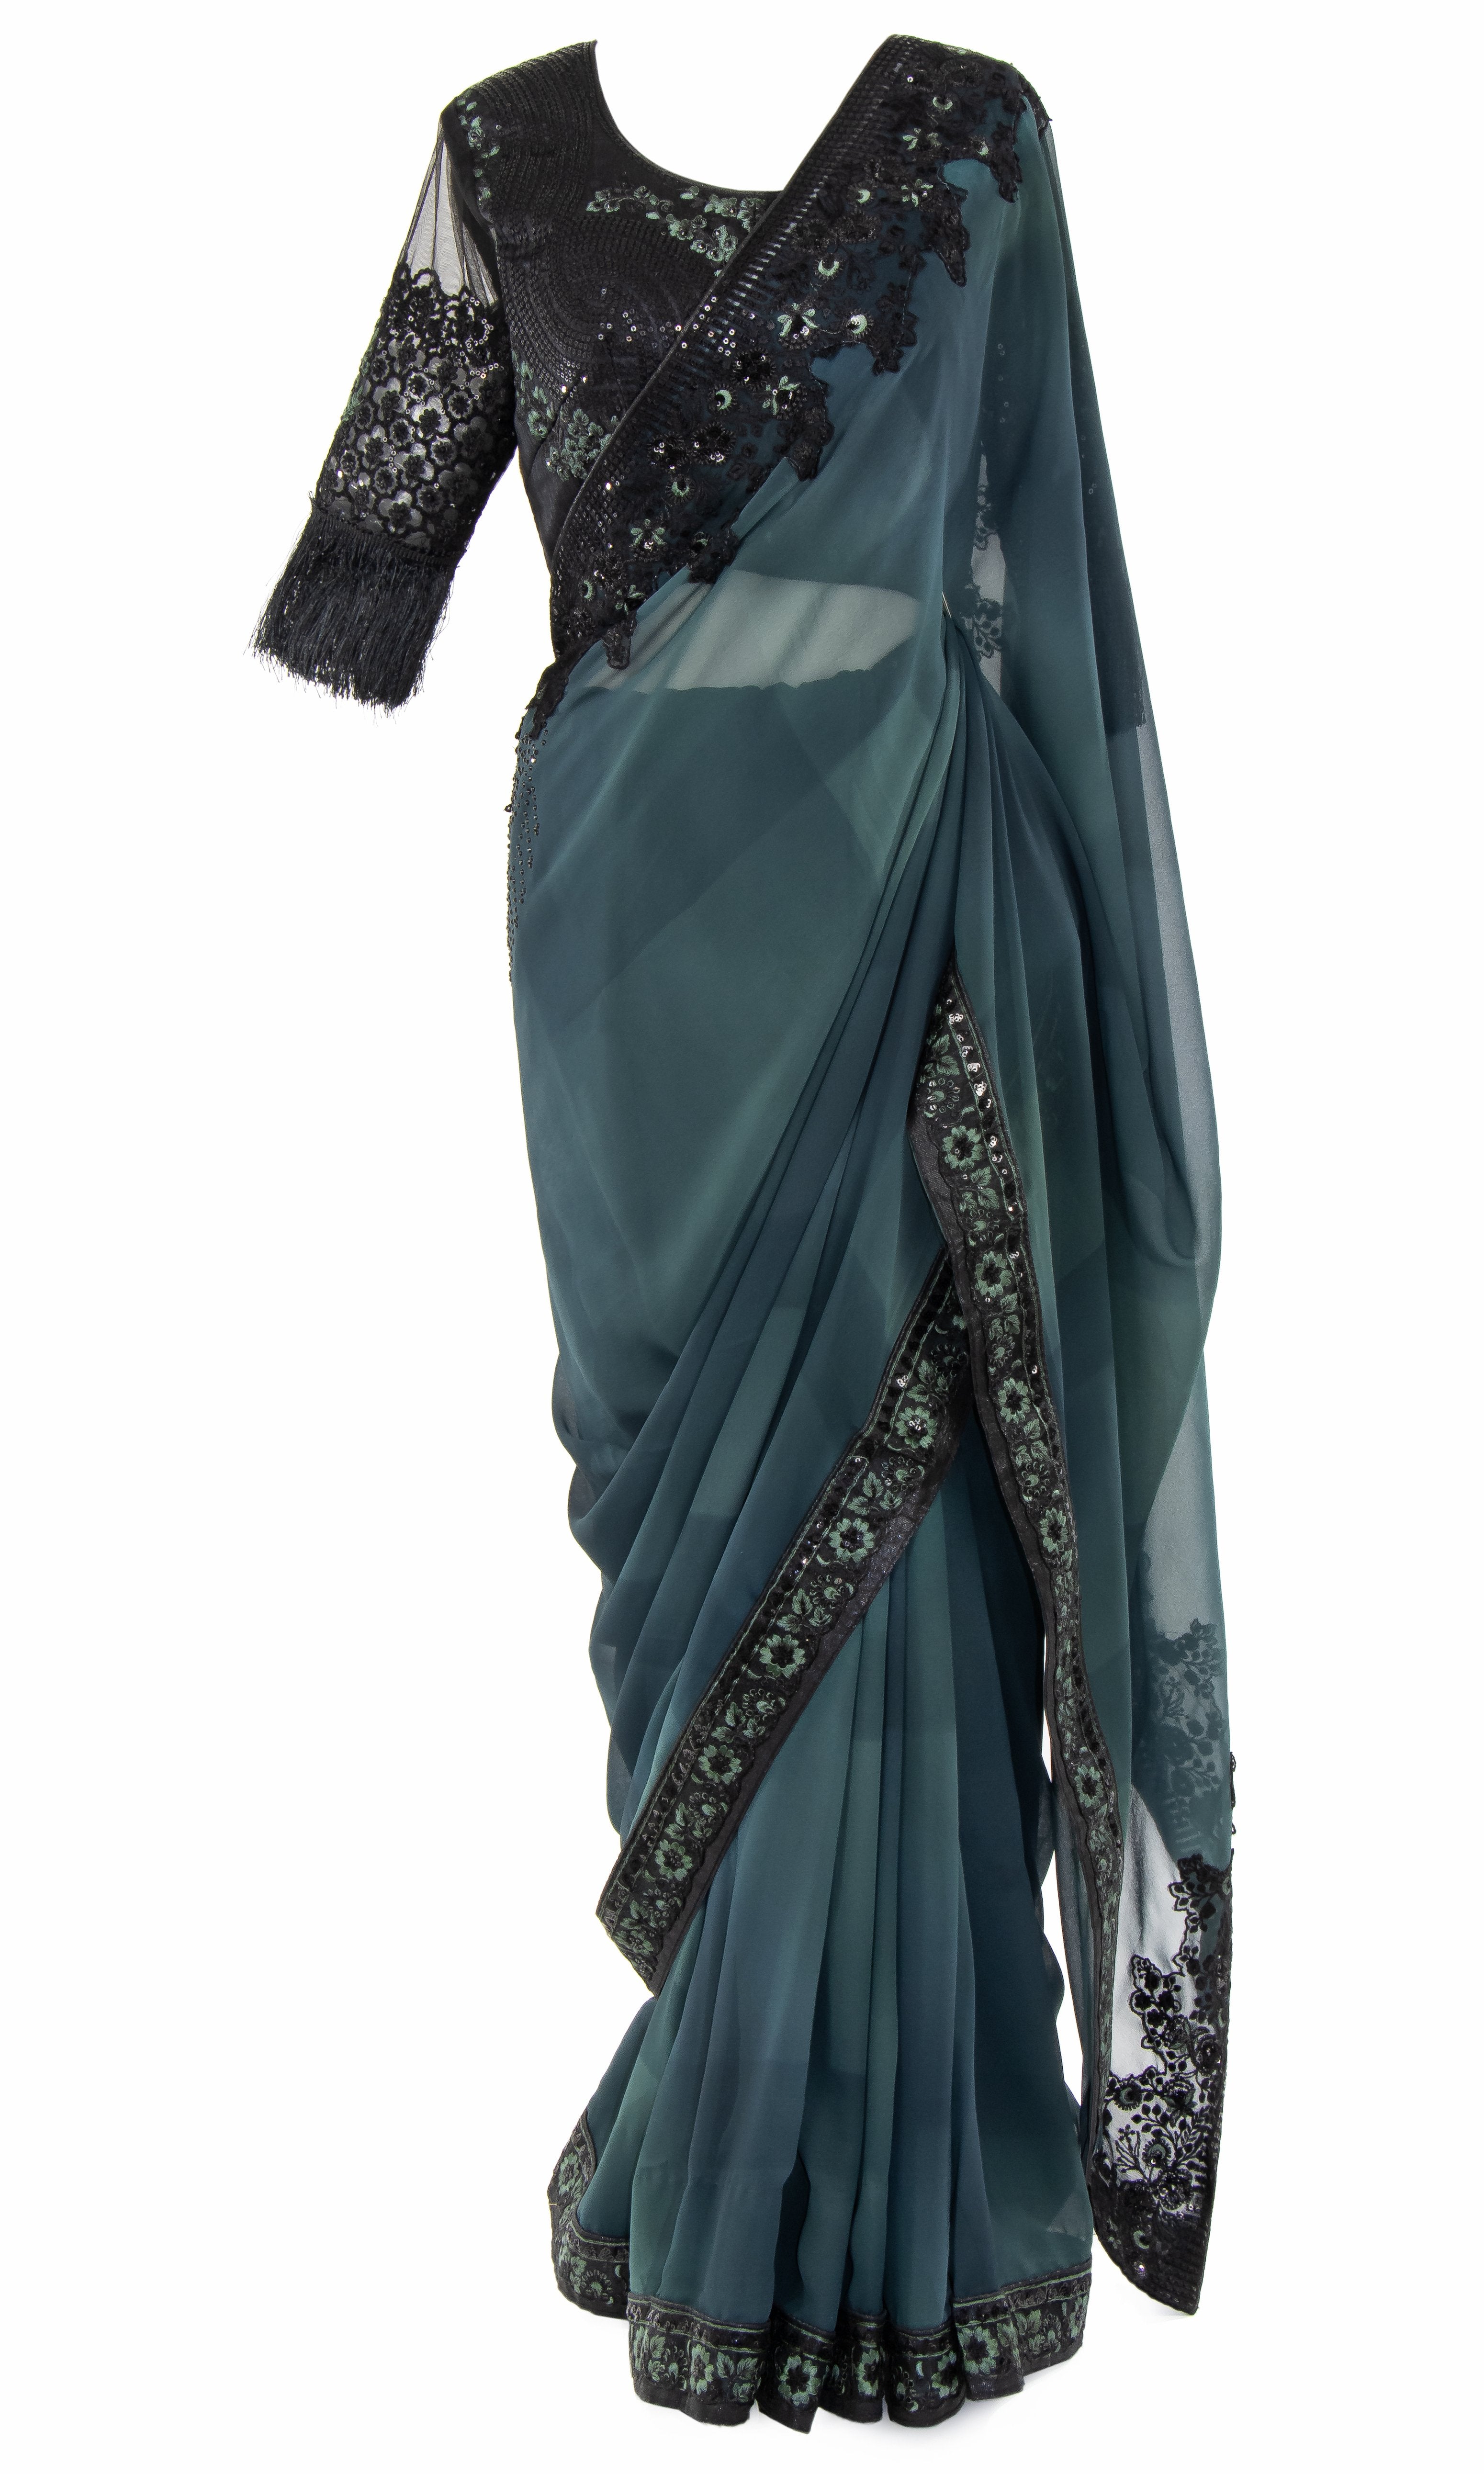 Teal printed Saree with Black sequined top that has see-through sleeves & stunning black border